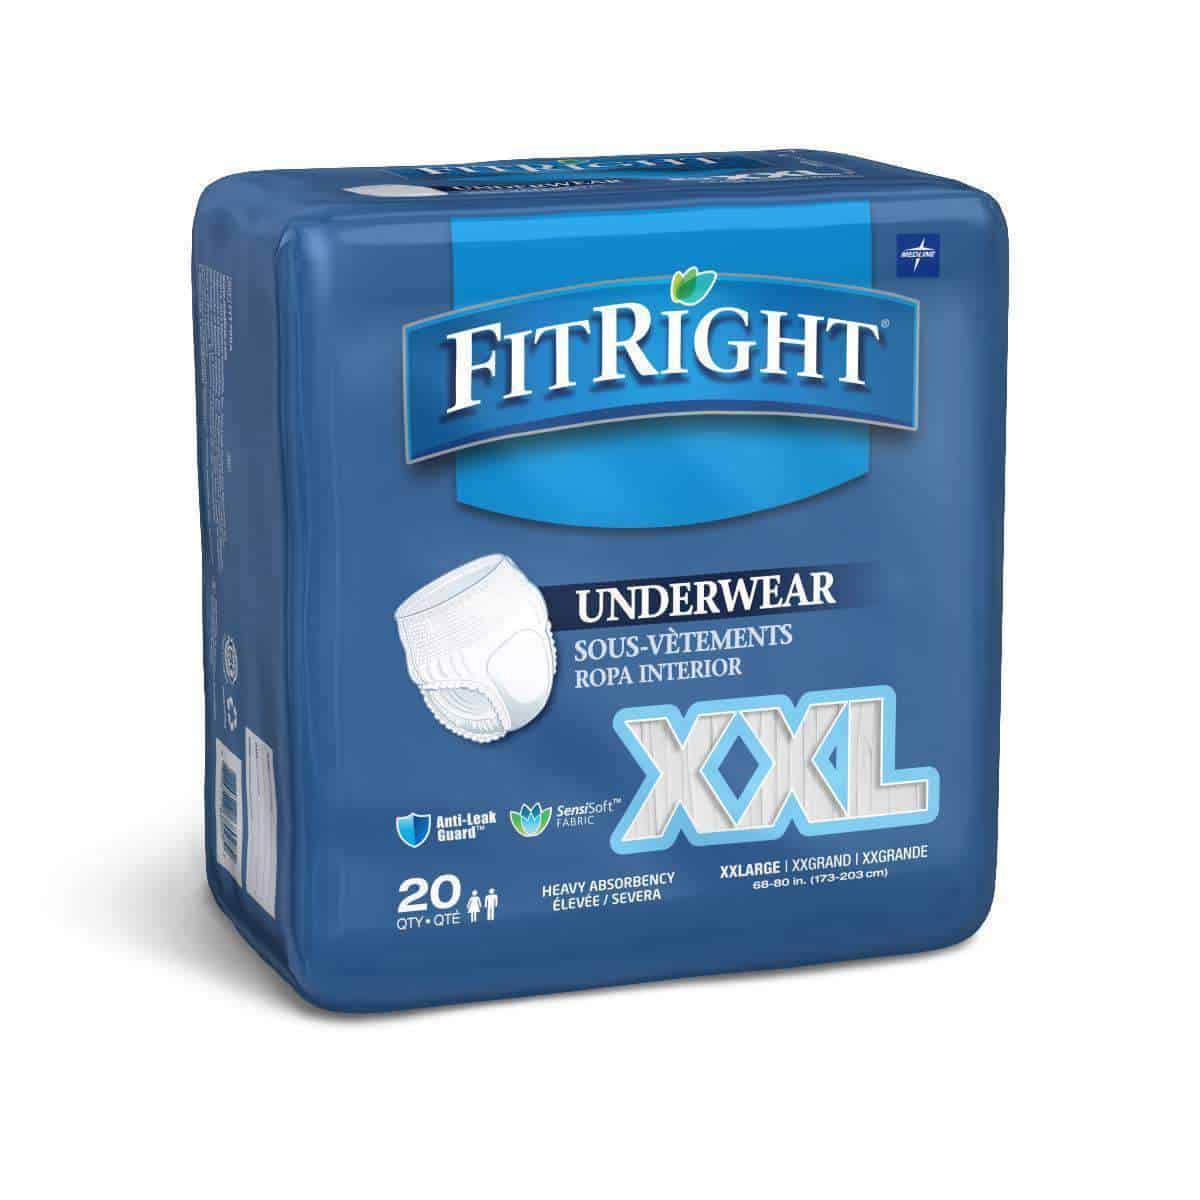 FitRight Adult Incontinence Underwear Heavy Absorbency - XX-Large, 68"-80"  Case 80 - Senior.com Incontinence